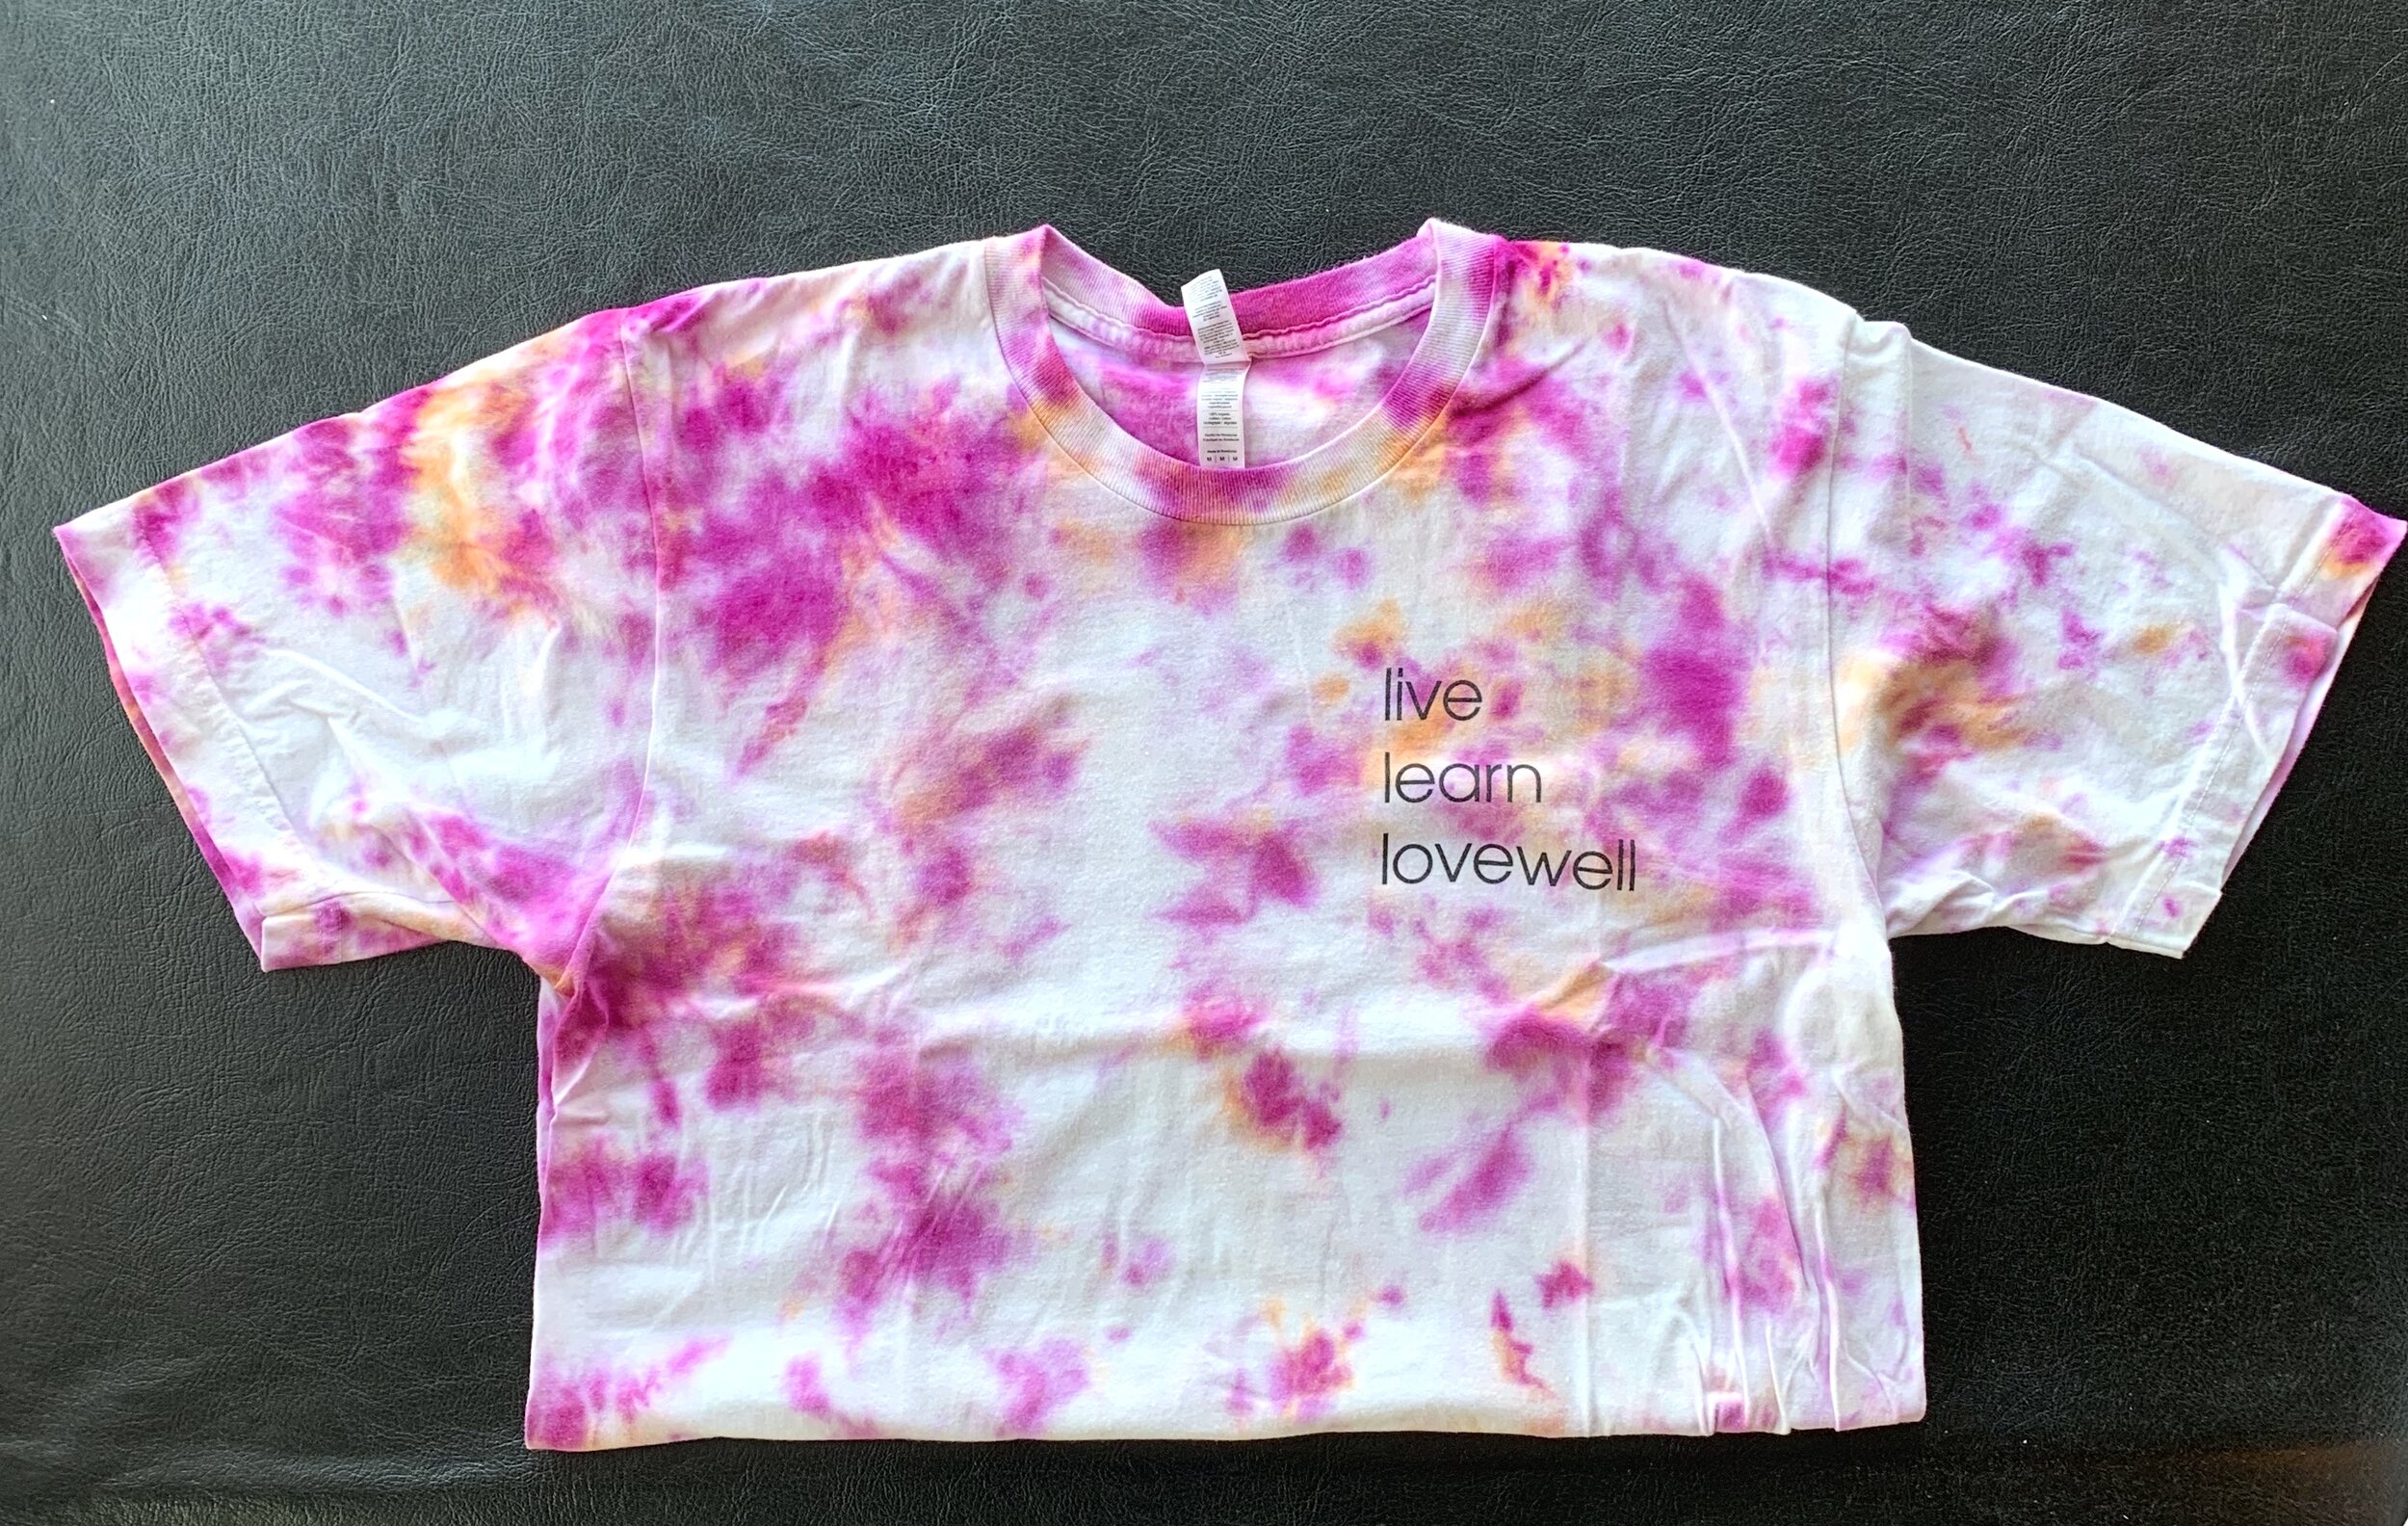 Getting Creative with Tie Dye - Live Learn Lovewell